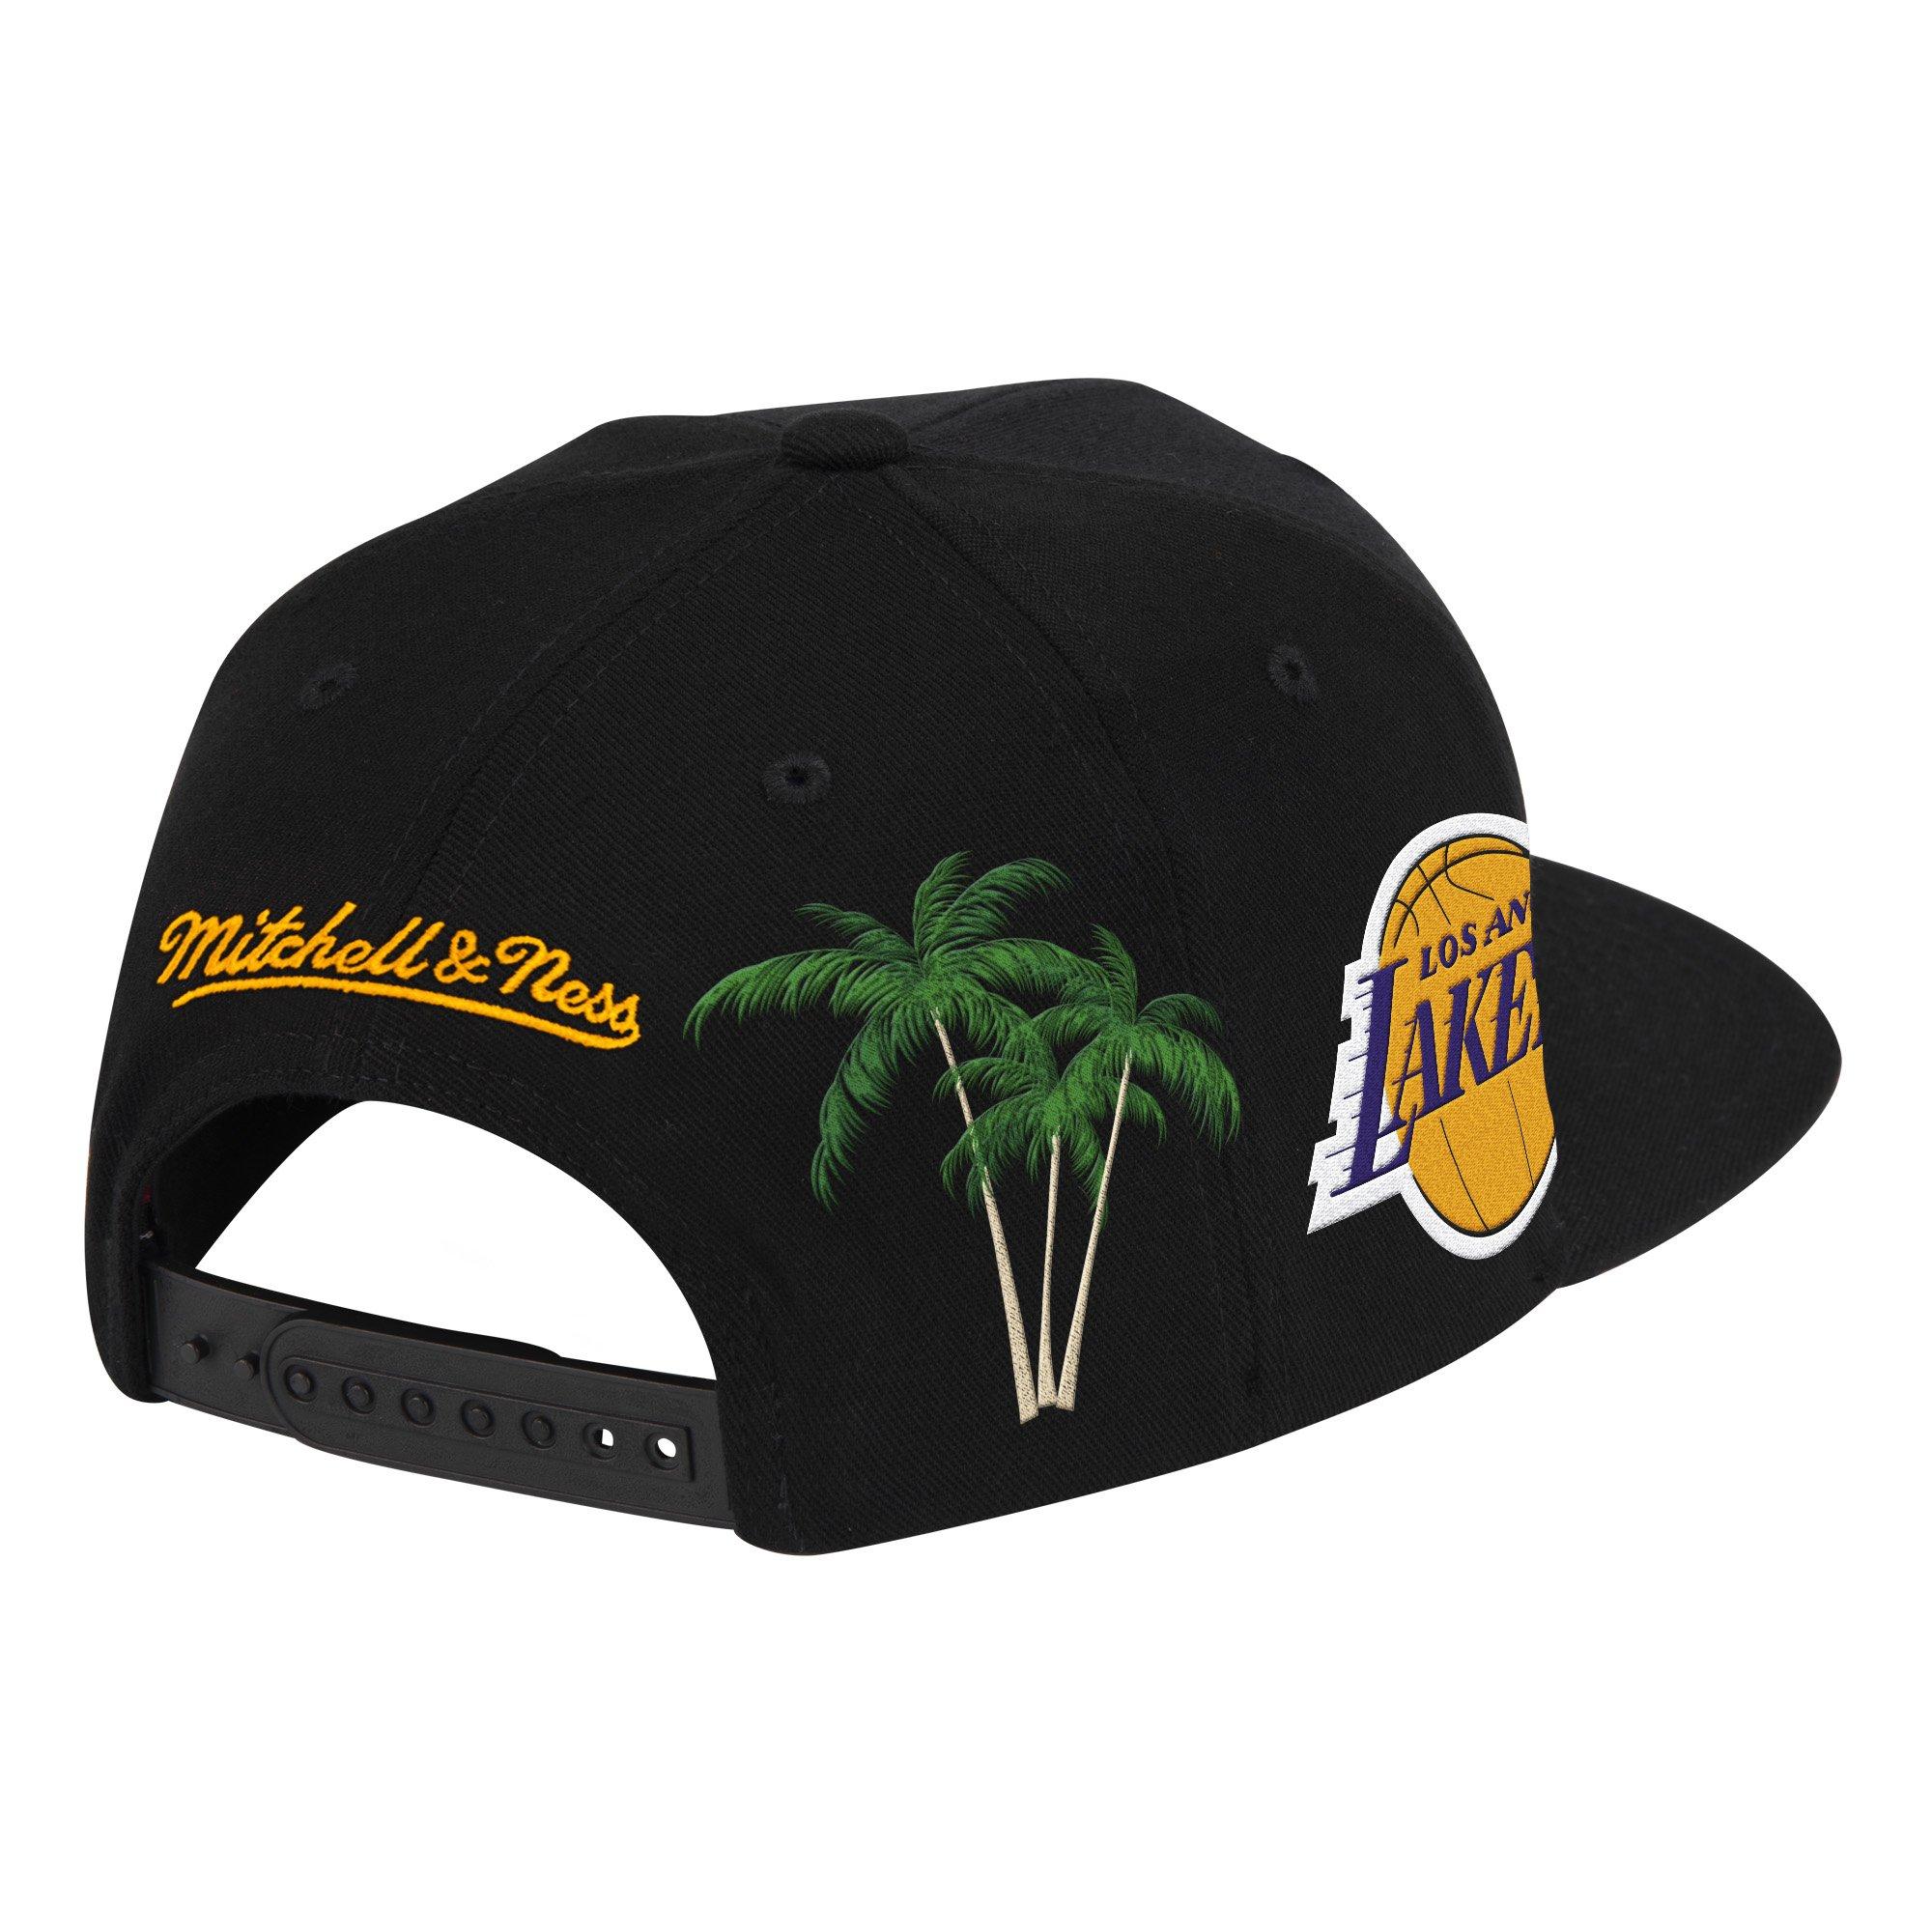 Mitchell & Ness Snapback Cap Circle Weald Patch Los Angeles Lakers black 